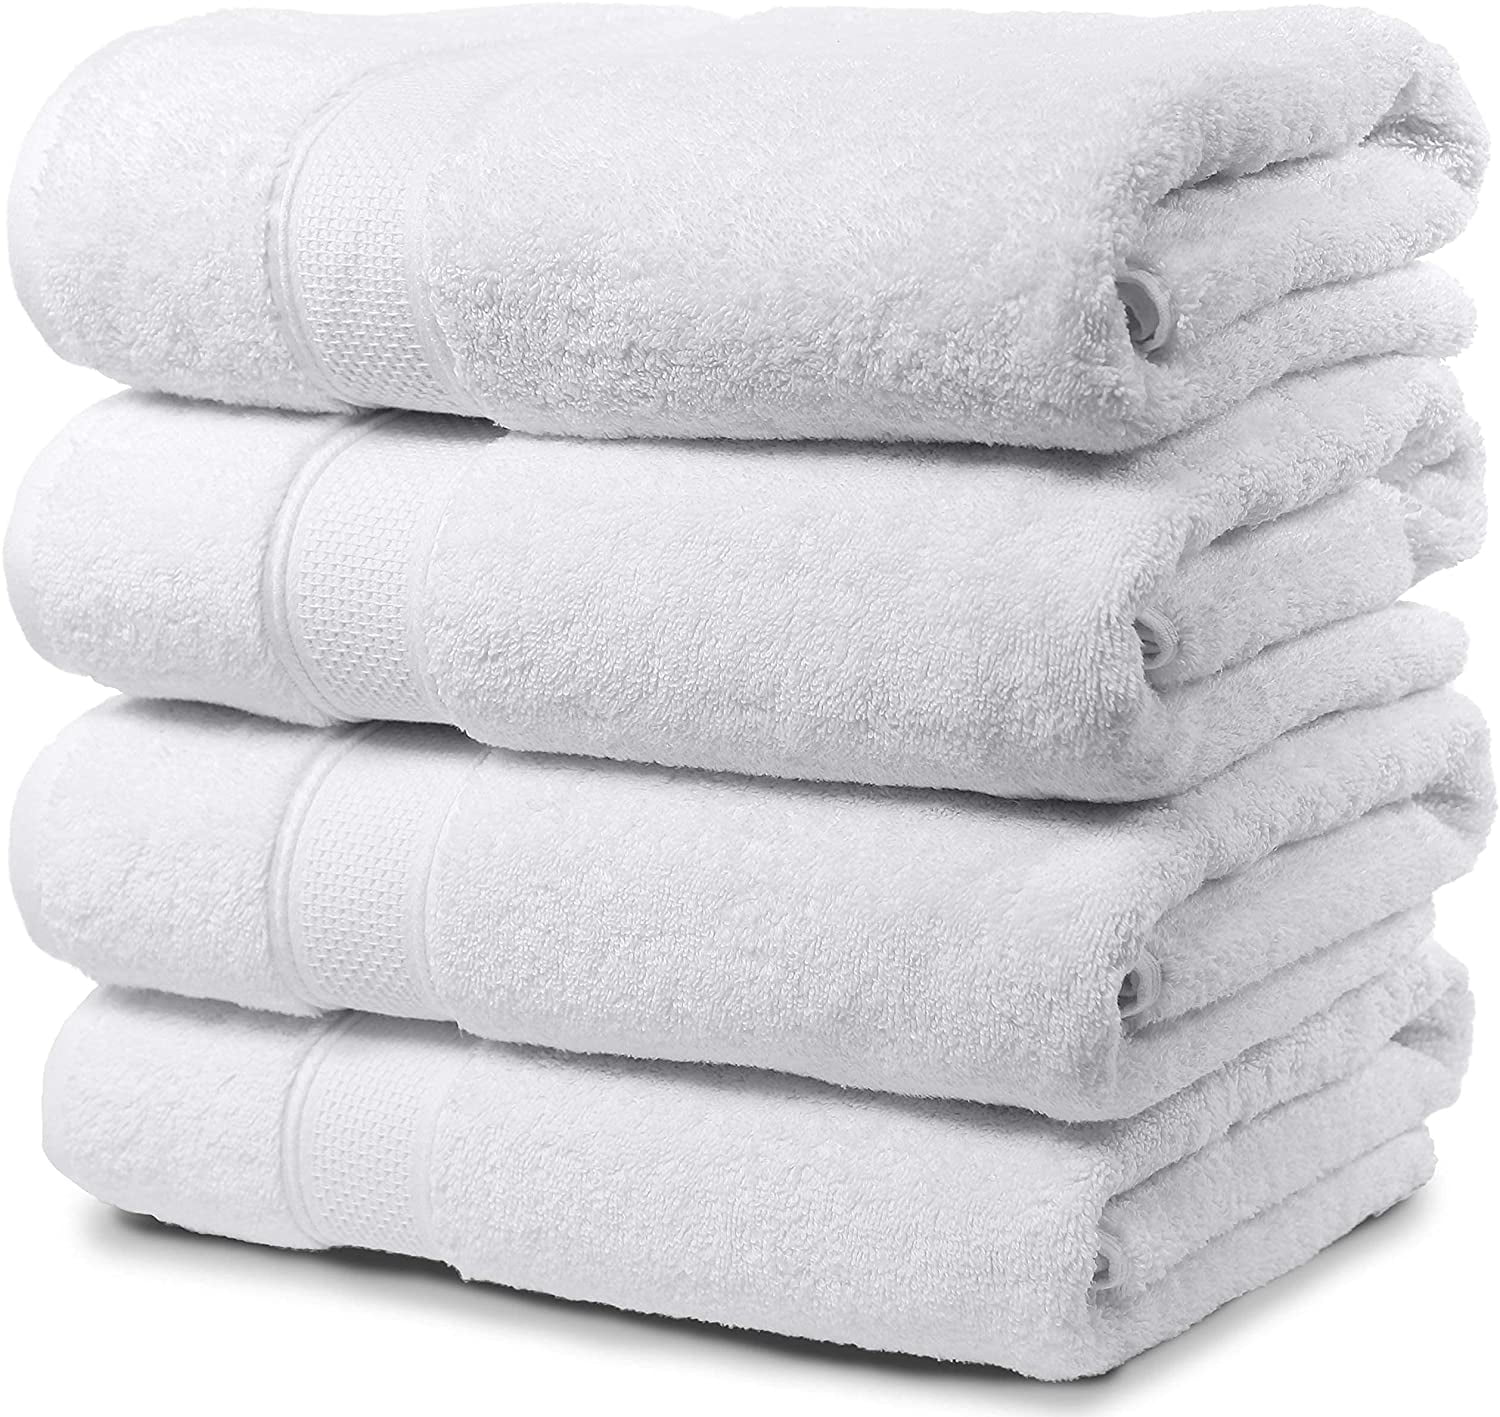 Maura Basics Performance Bath Towels with Hanging Loop. 30”x56” American  Standard Towel Size. Soft, Durable, Long Lasting and Absorbent 100% Turkish